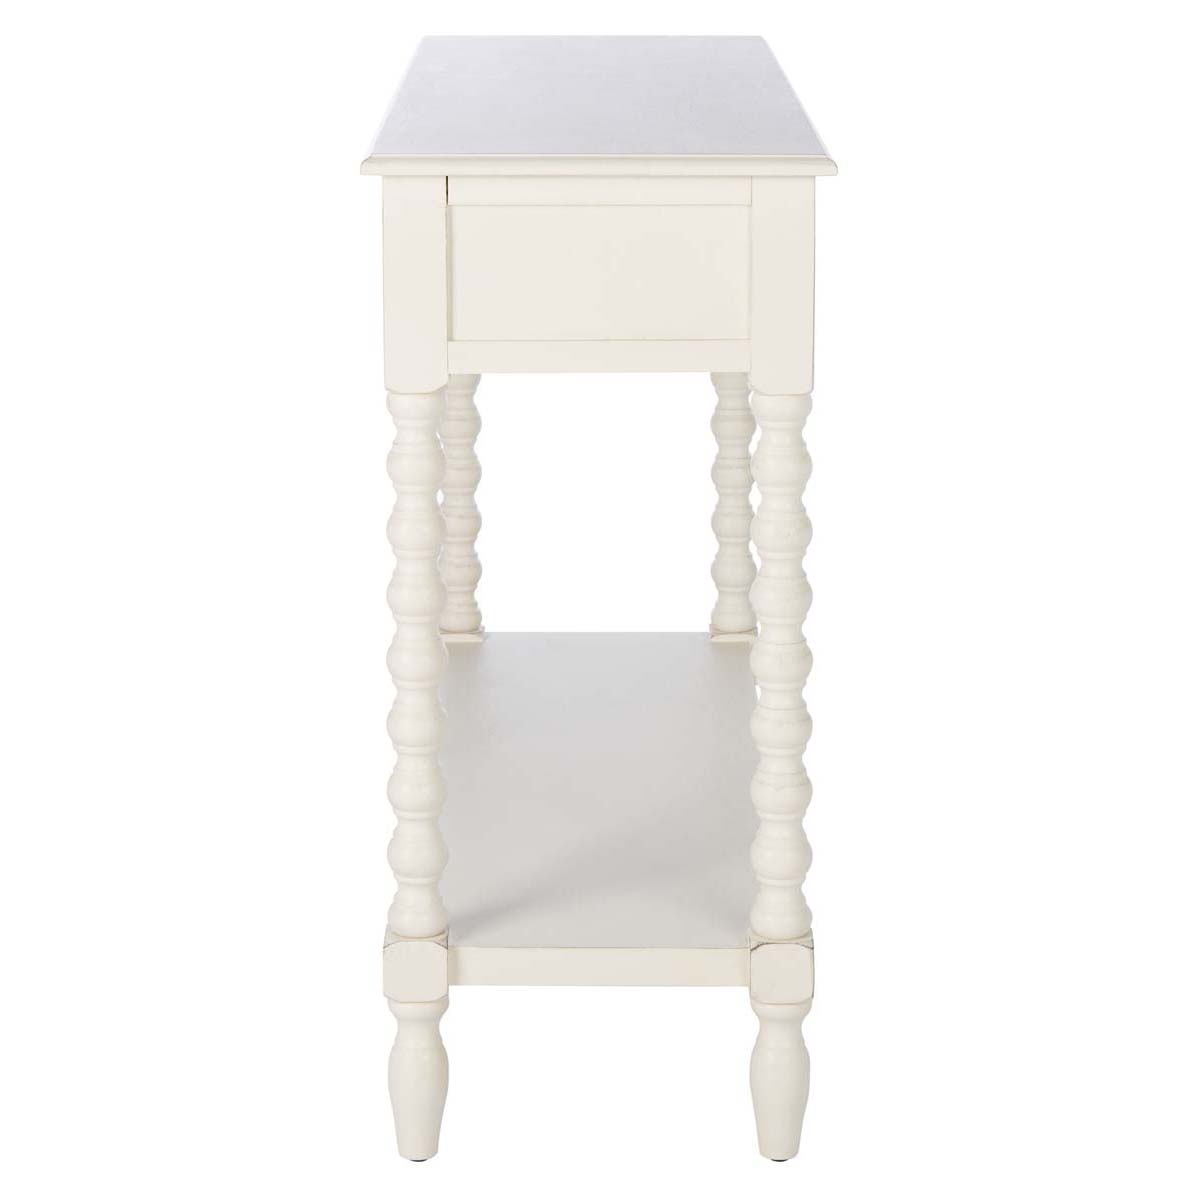 Safavieh Athena 2 Drawer Console Table, CNS5702 - Distressed White